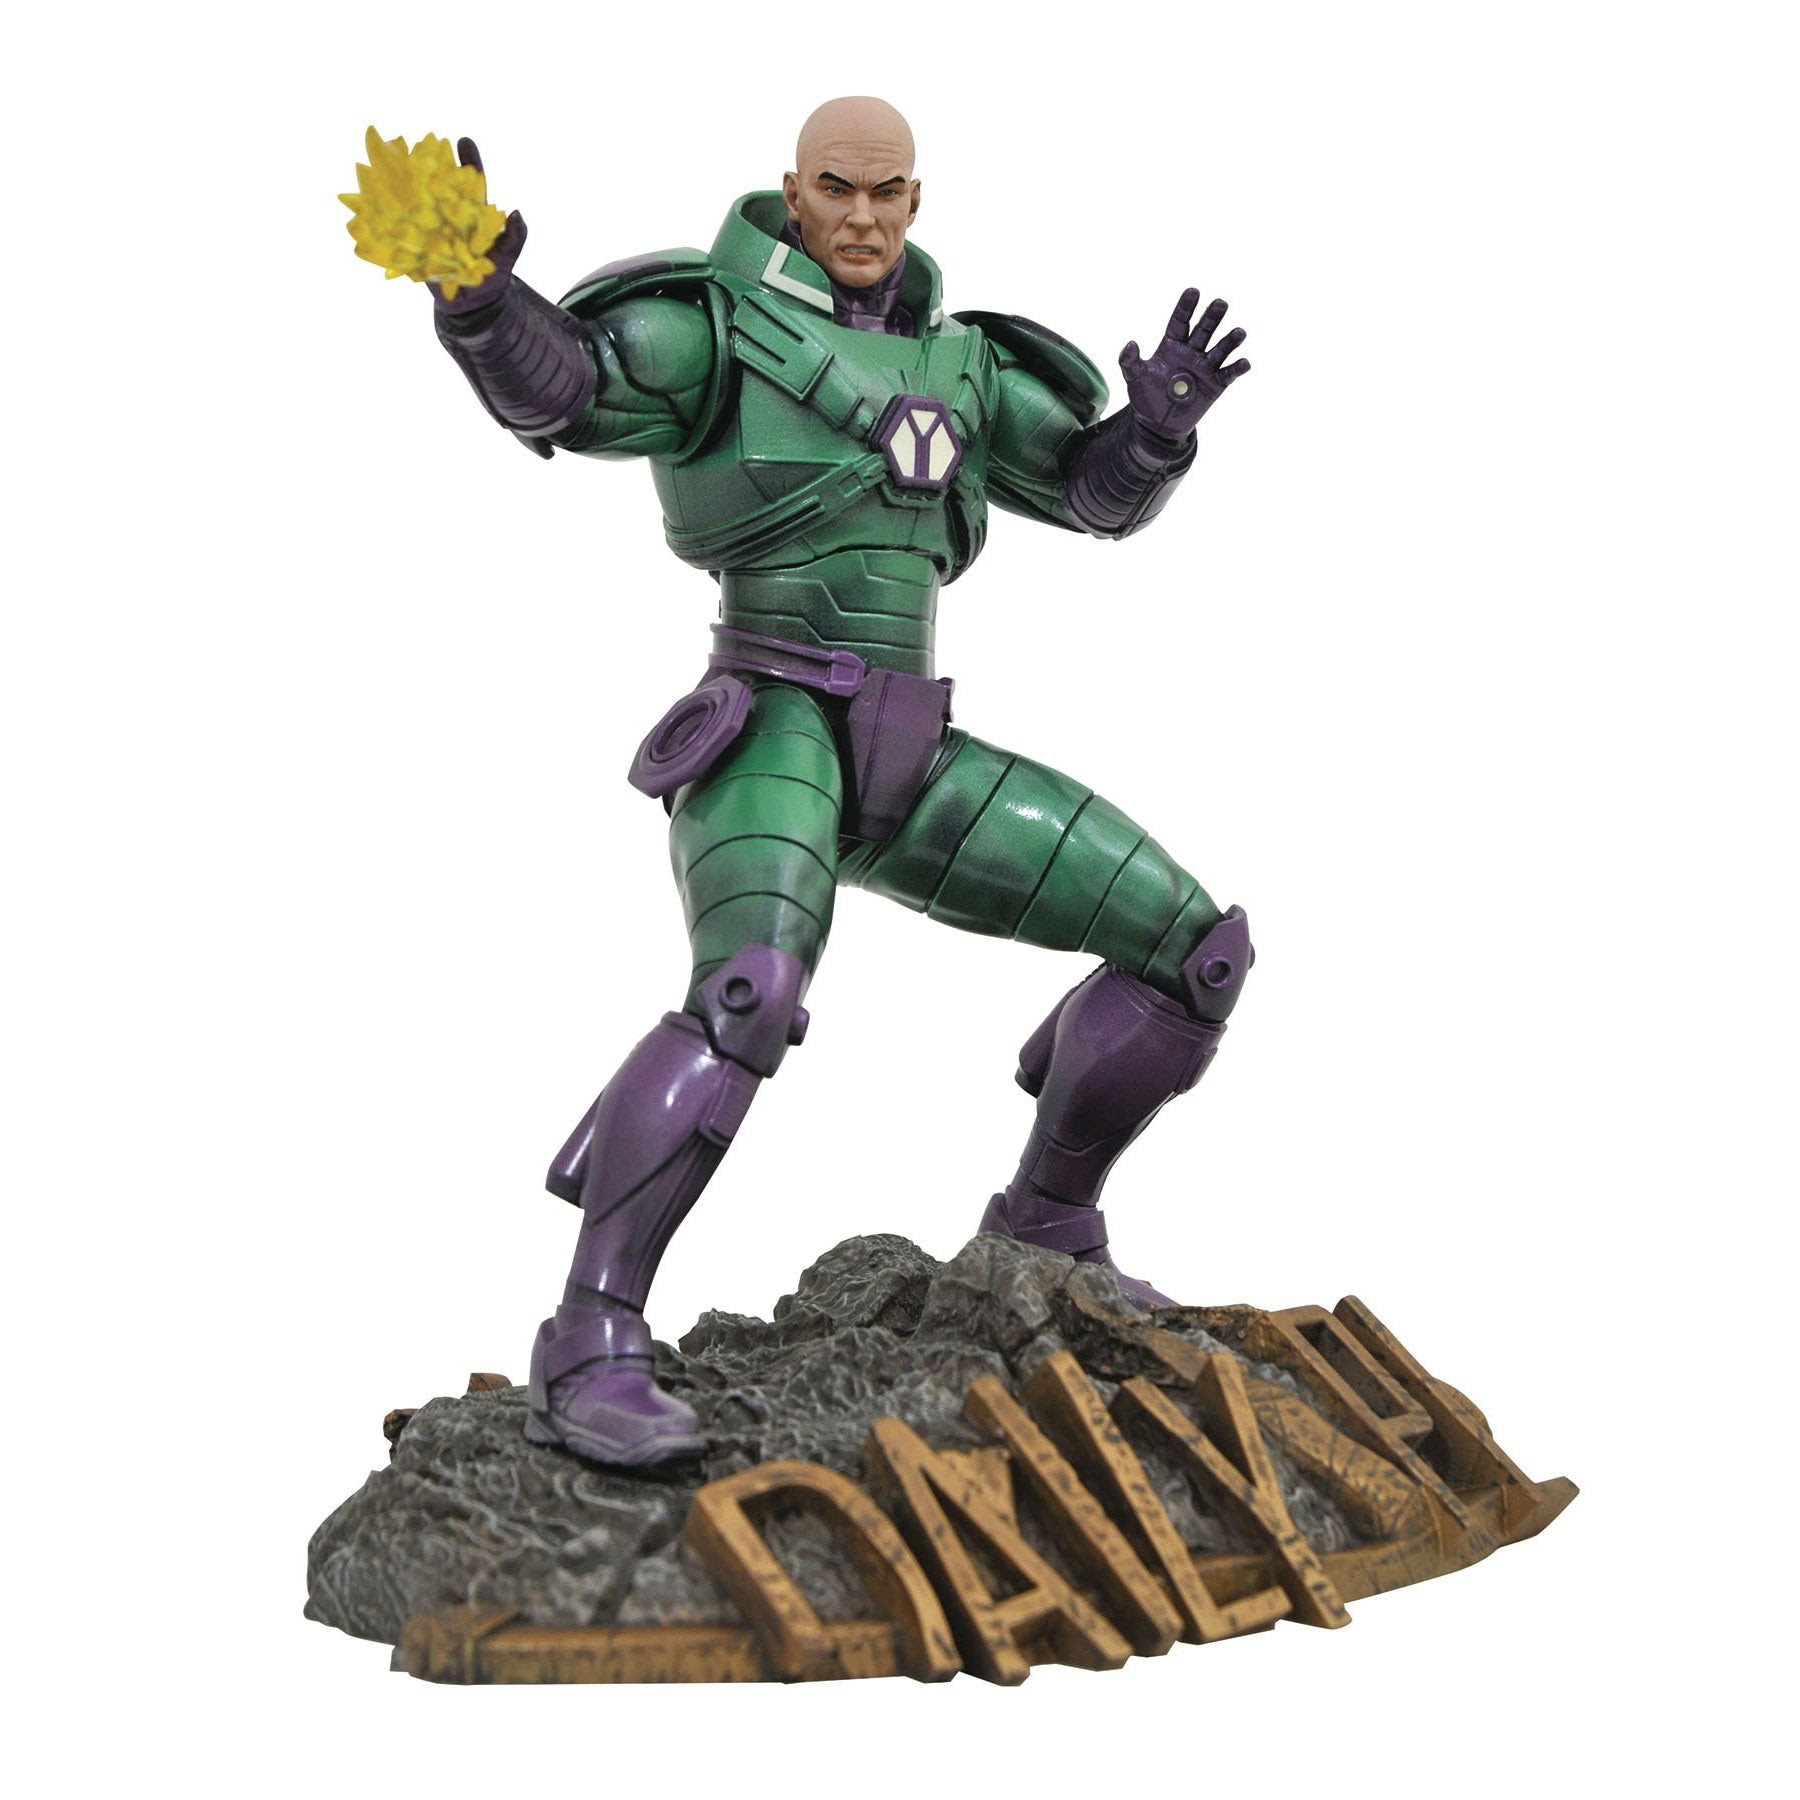 Image of DC Gallery Comic Lex Luthor PVC Statue - JULY 2020